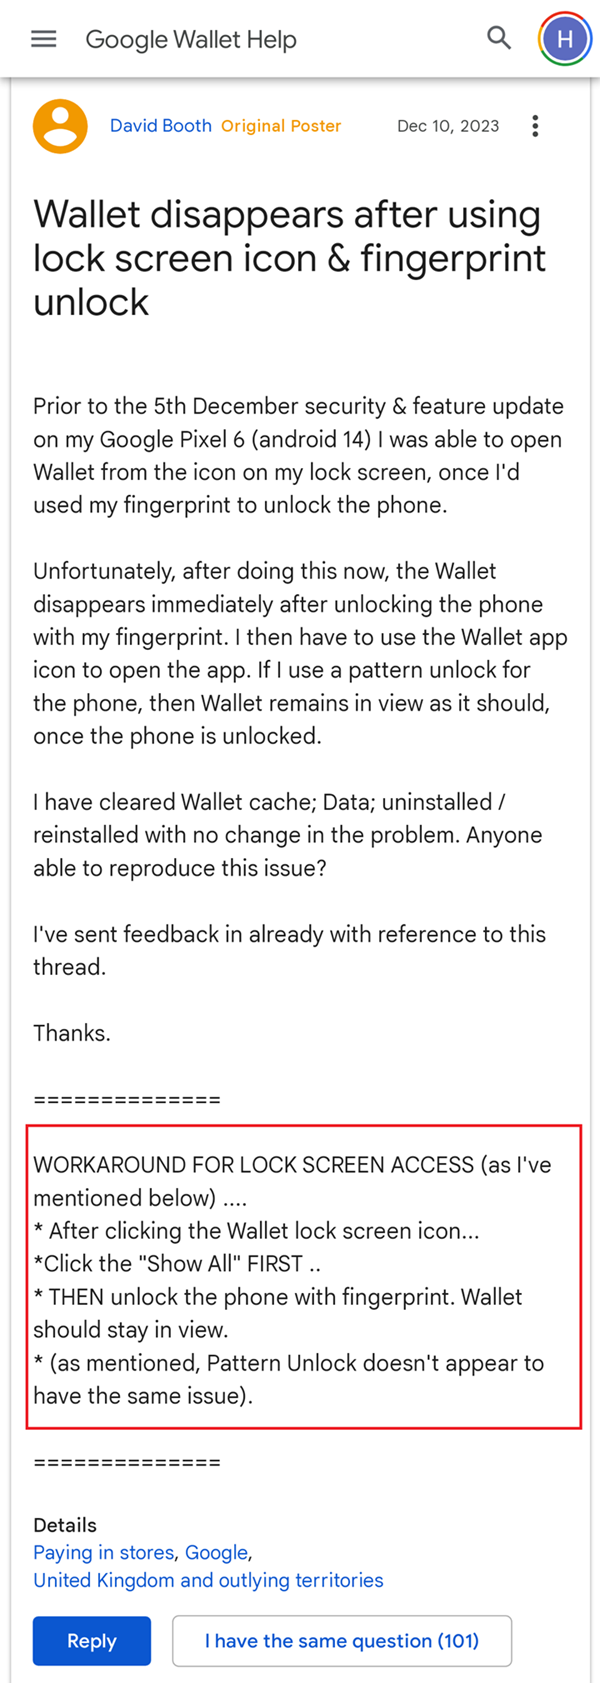 A-screenshot-of-reports-and-workaround-from-Google-Wallet-users-about-the-app-crashing-on-Pixel-phones-when-using-fingerprint-unlock